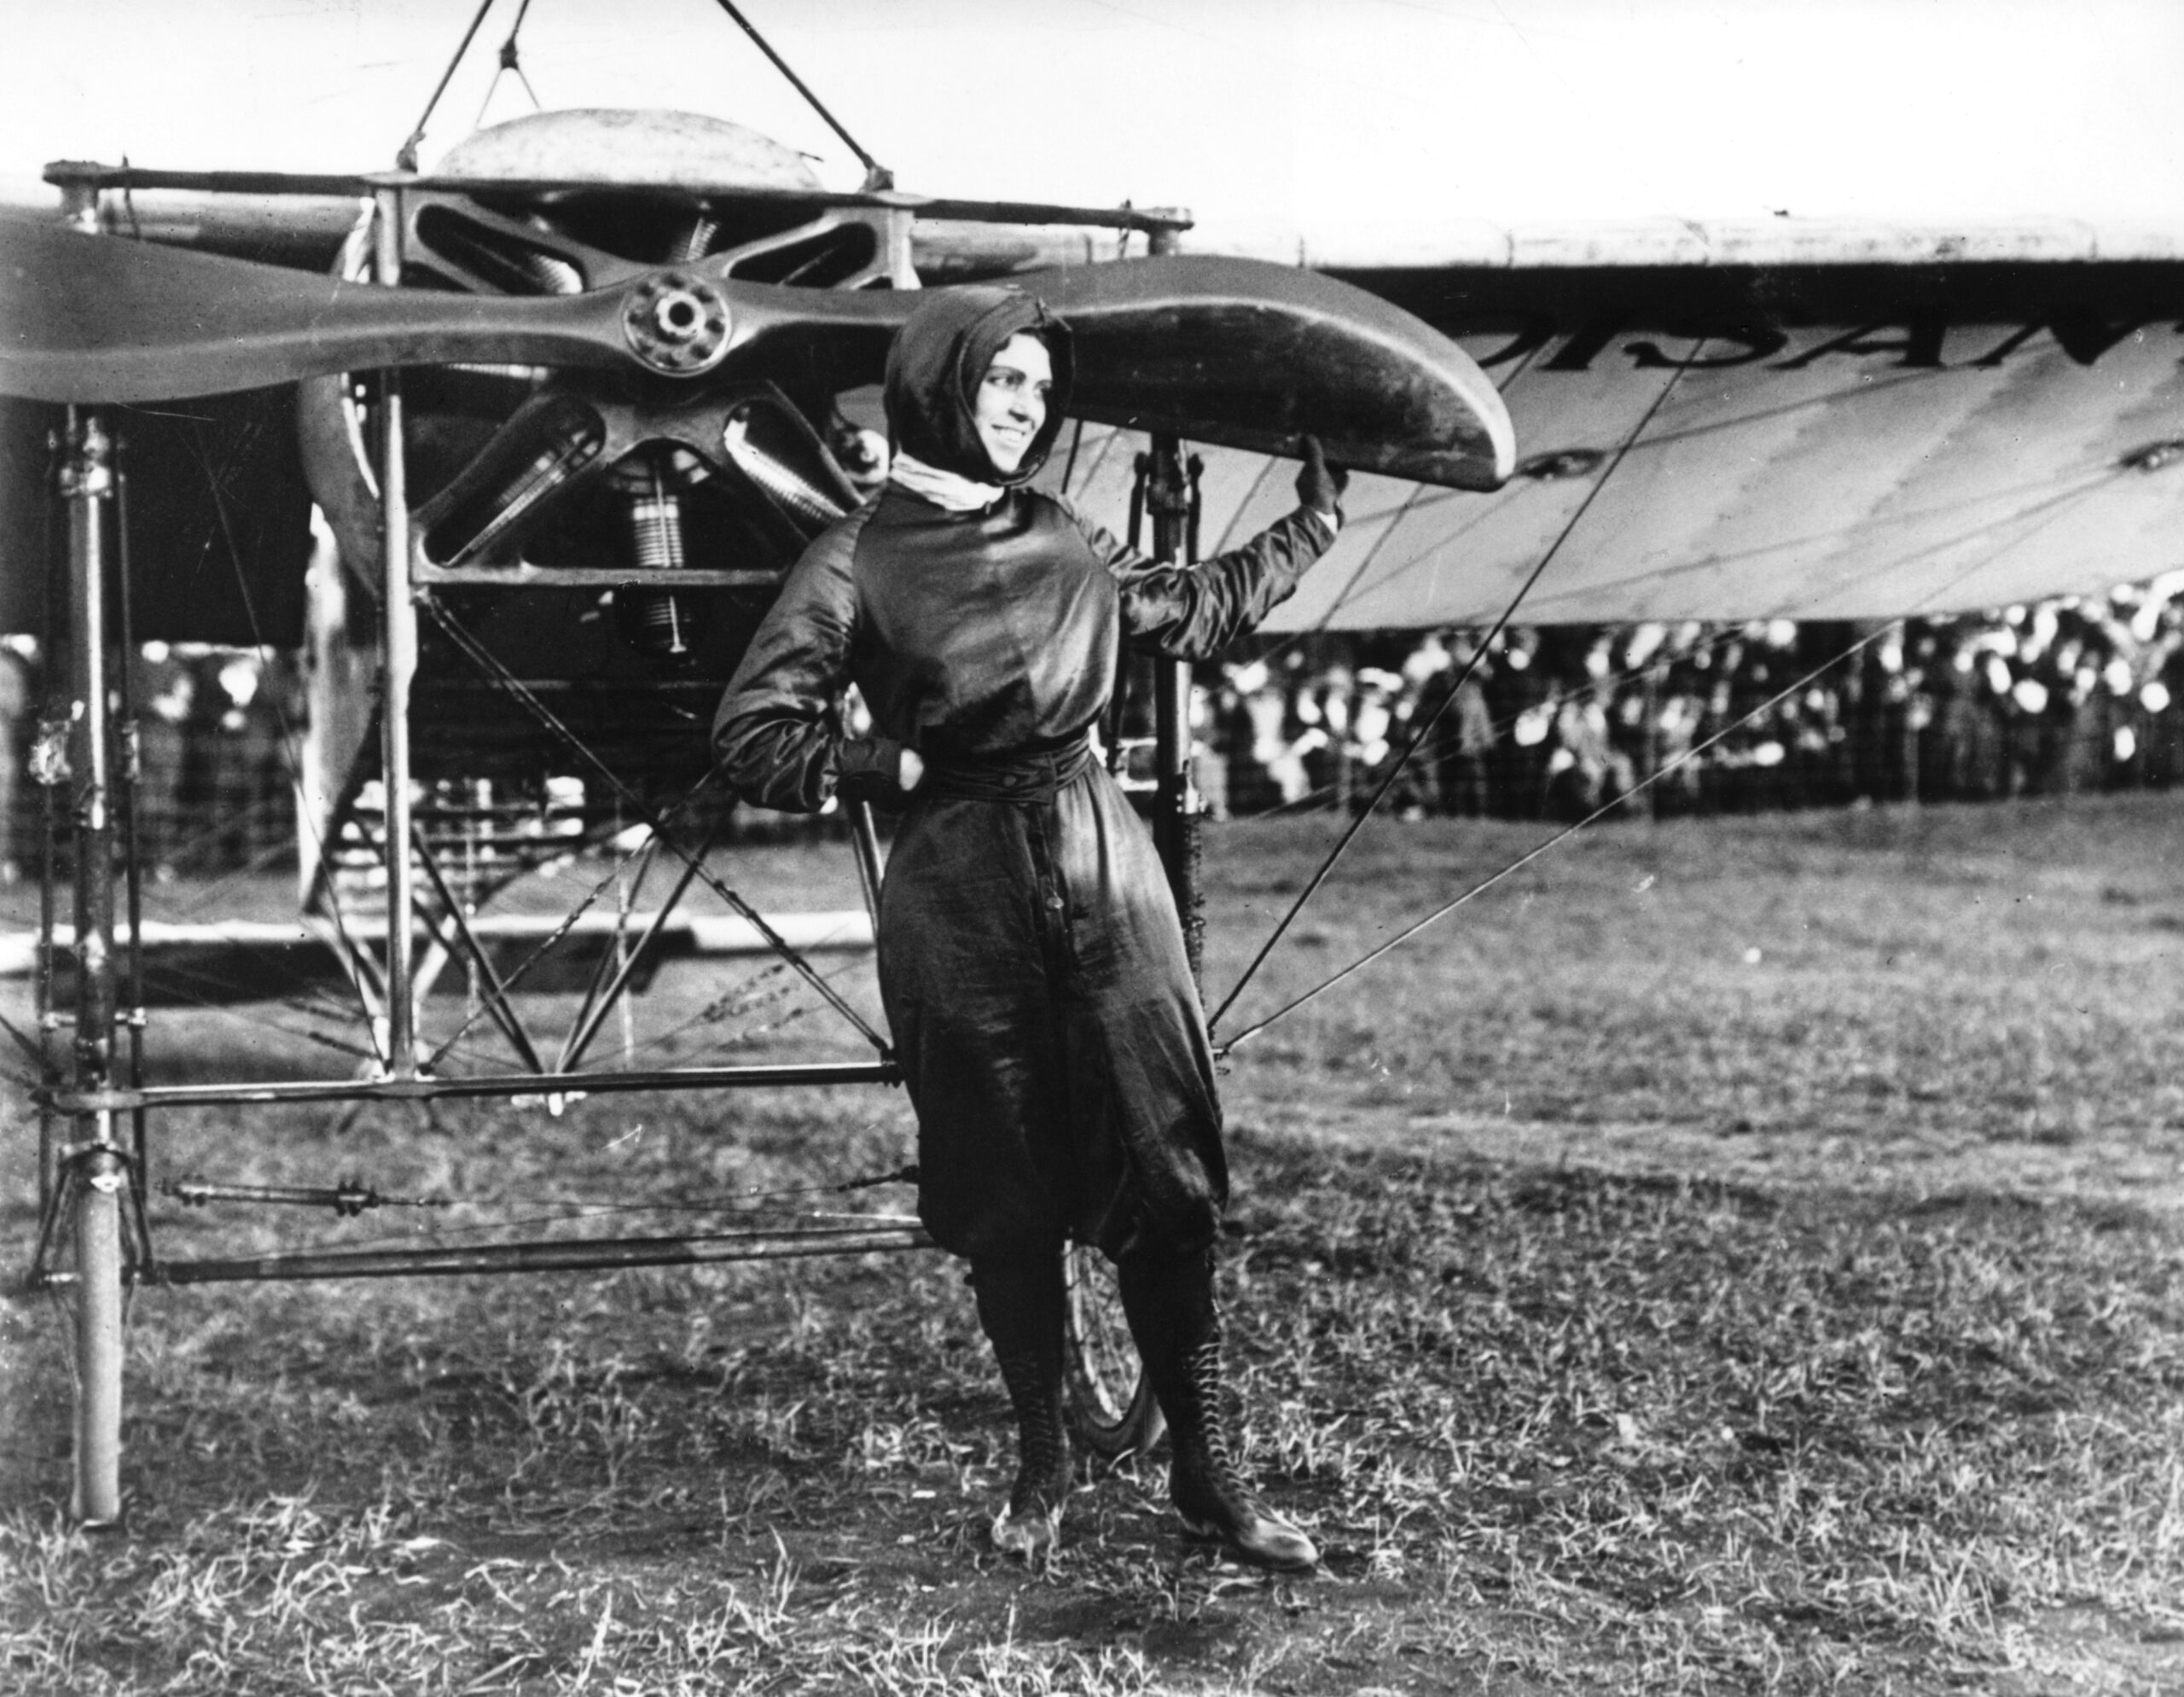 In 1911, Harriet Quimby became the first woman in the United States to receive her pilot's license.